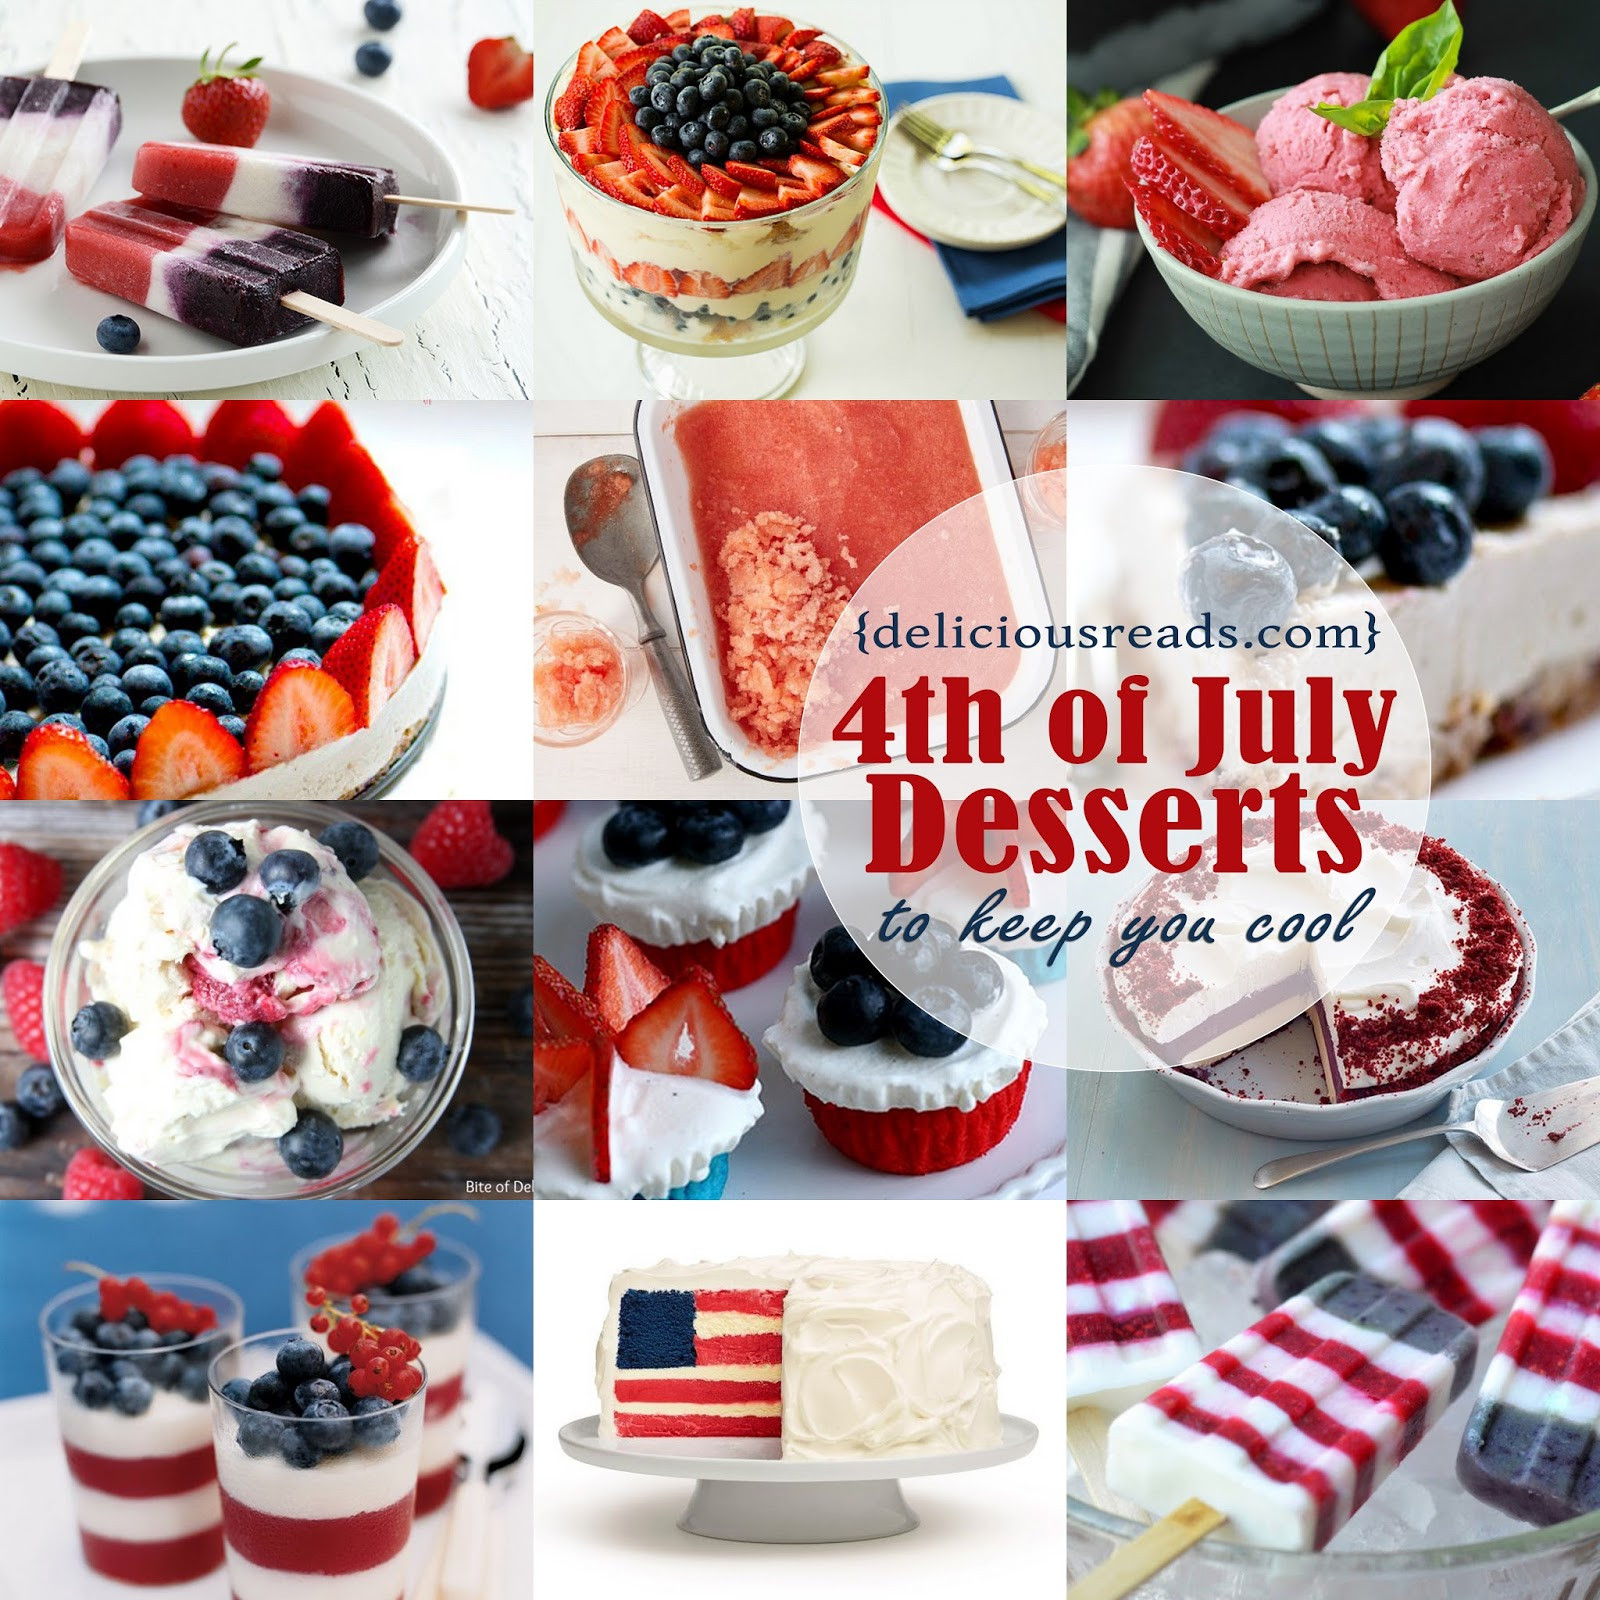 4Th July Desserts
 Delicious Reads Delicious Dish 4th of July Desserts That